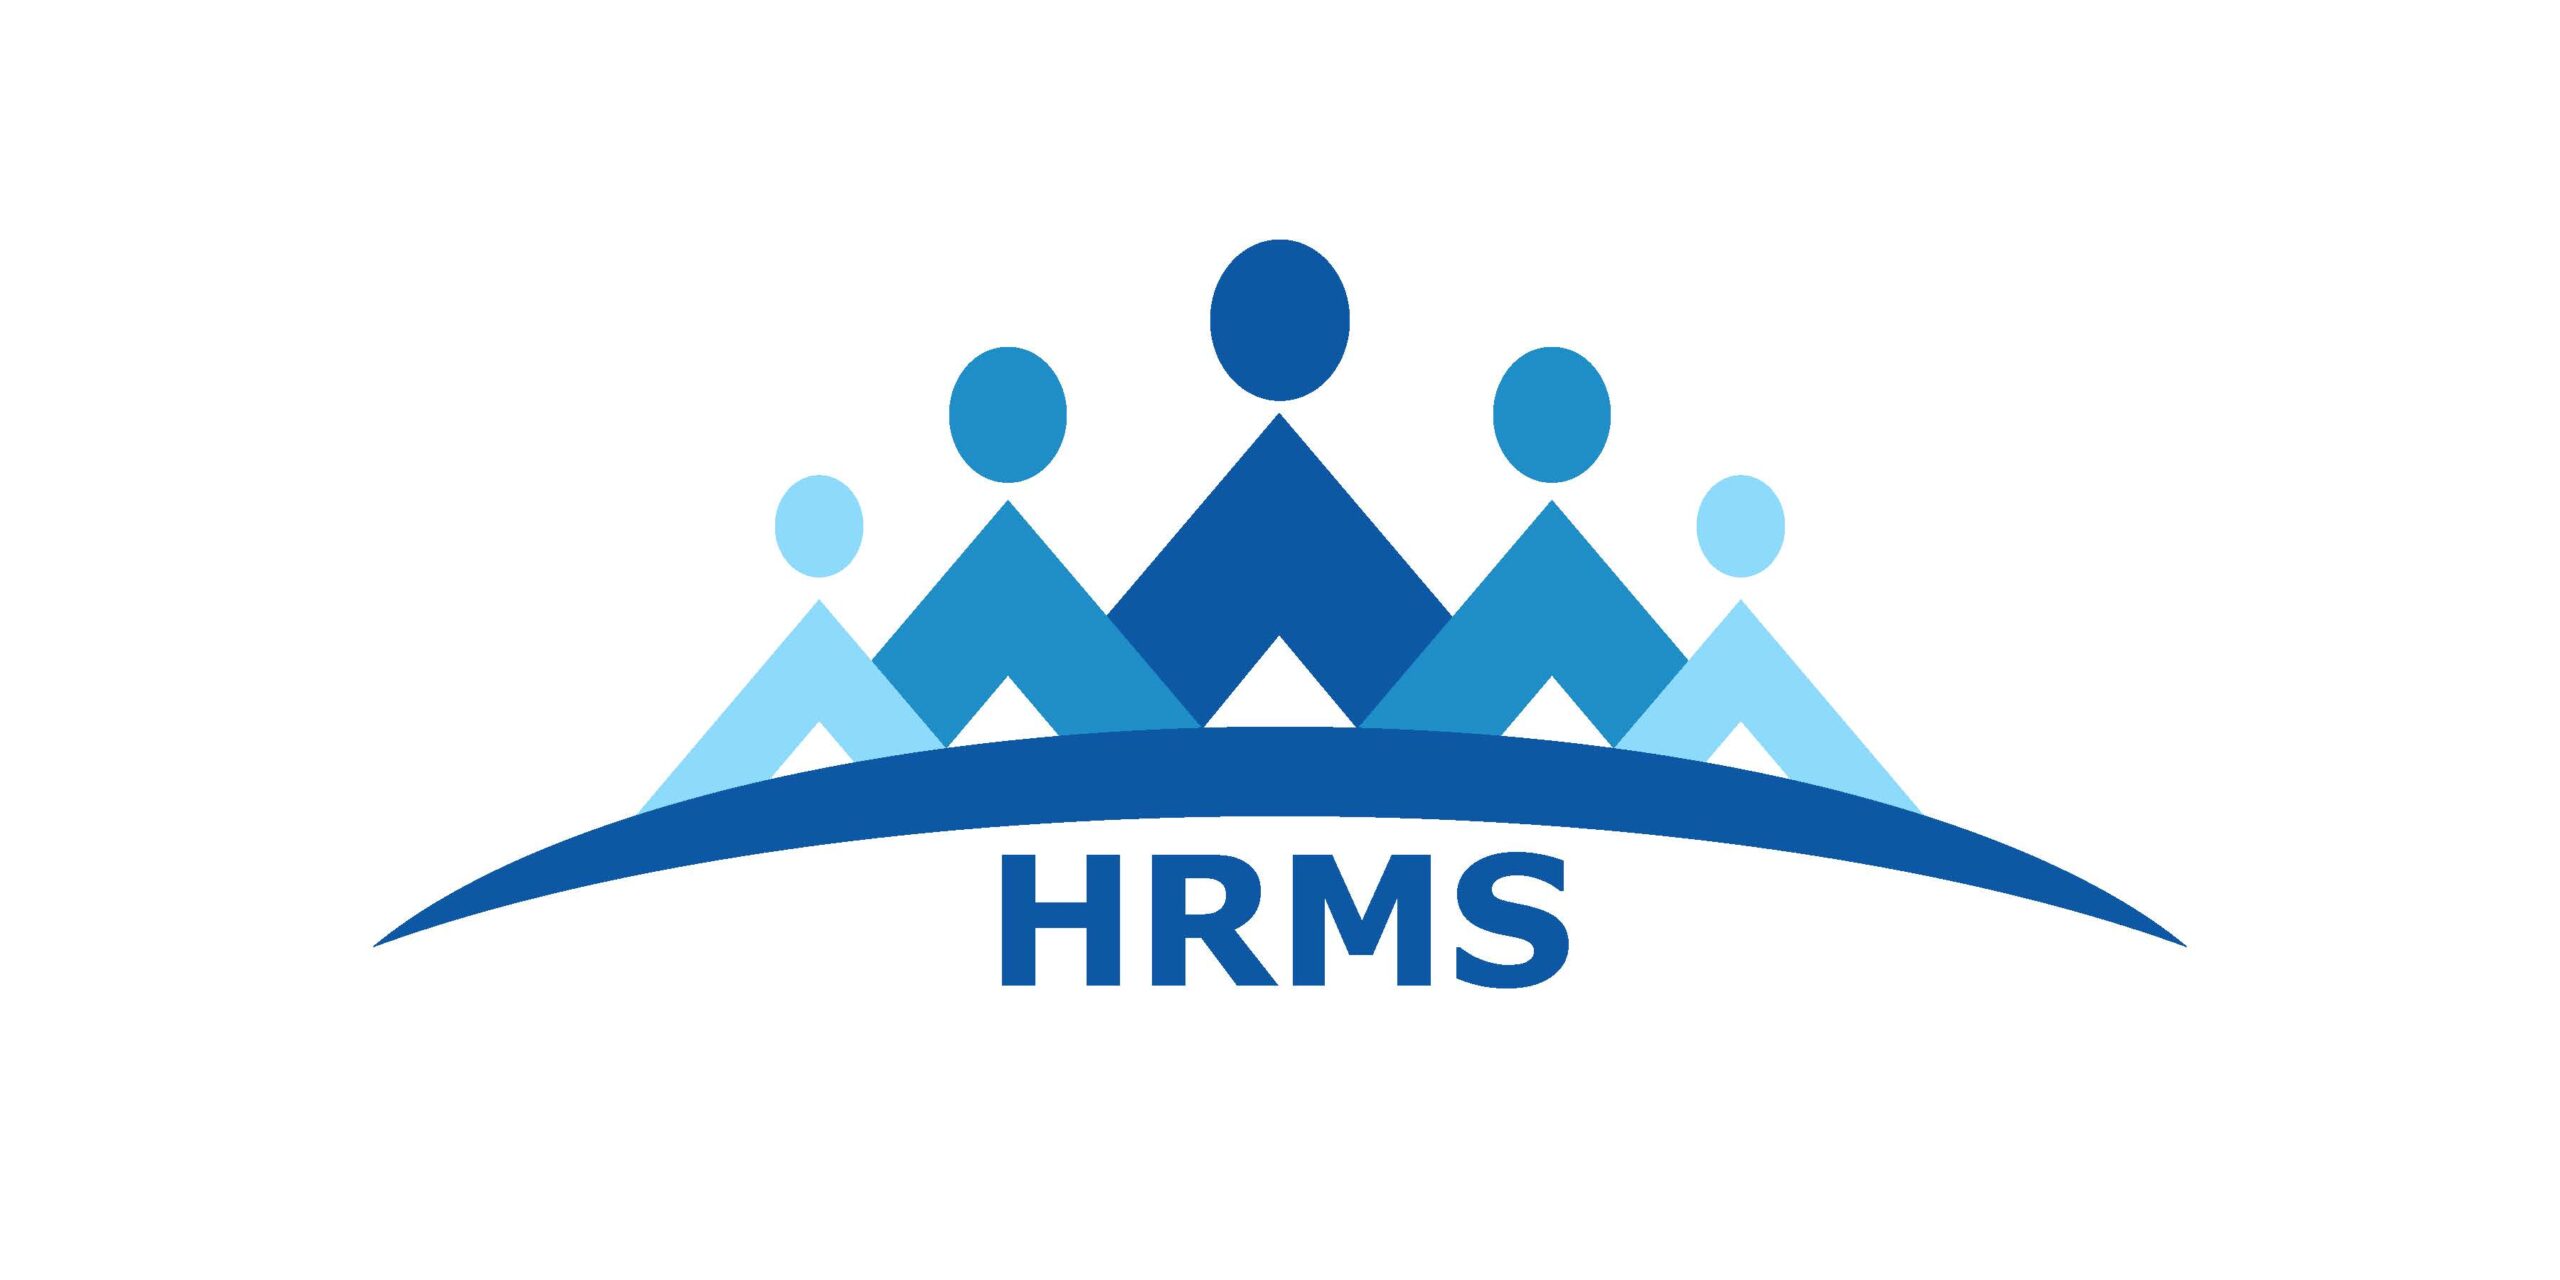 What Makes Employees Communicate And Collaborate With HRMS?